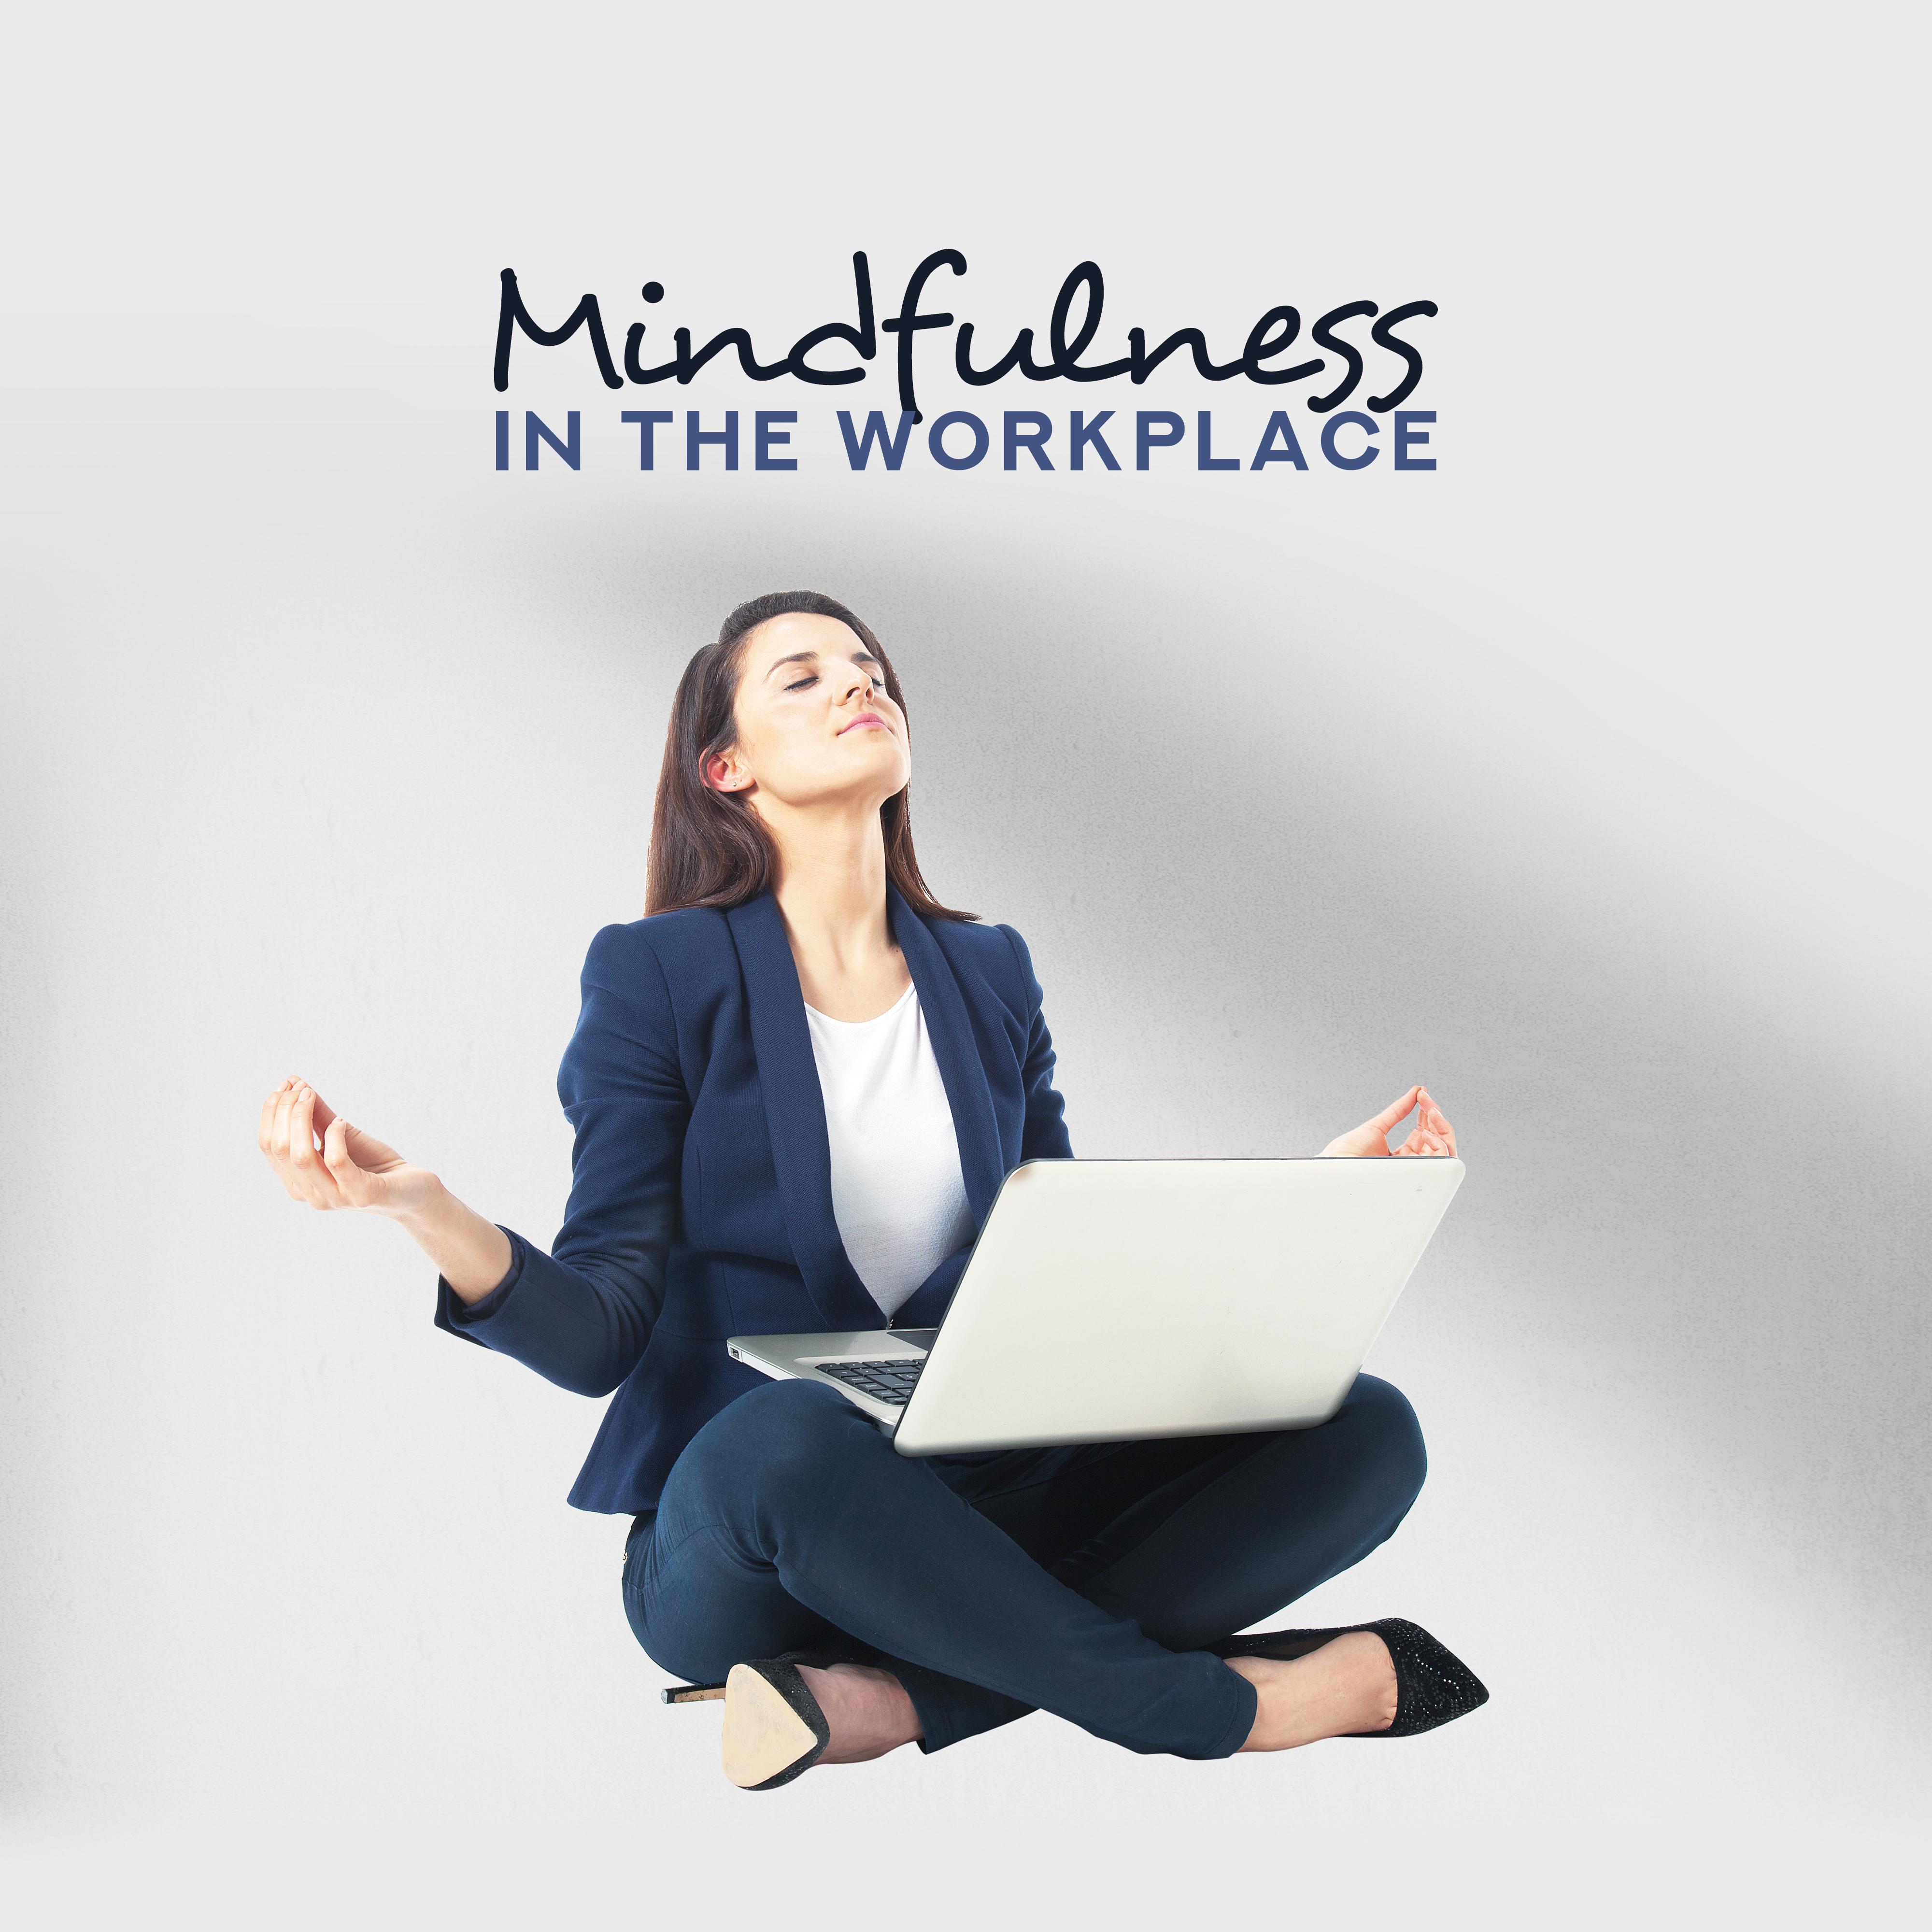 Mindfulness in the Workplace  Music for Meditation, Improves Concentration, Productivity and Wellbeing, Reduces Stress and Tension, Increases the Ability of Creative Thinking and Perception